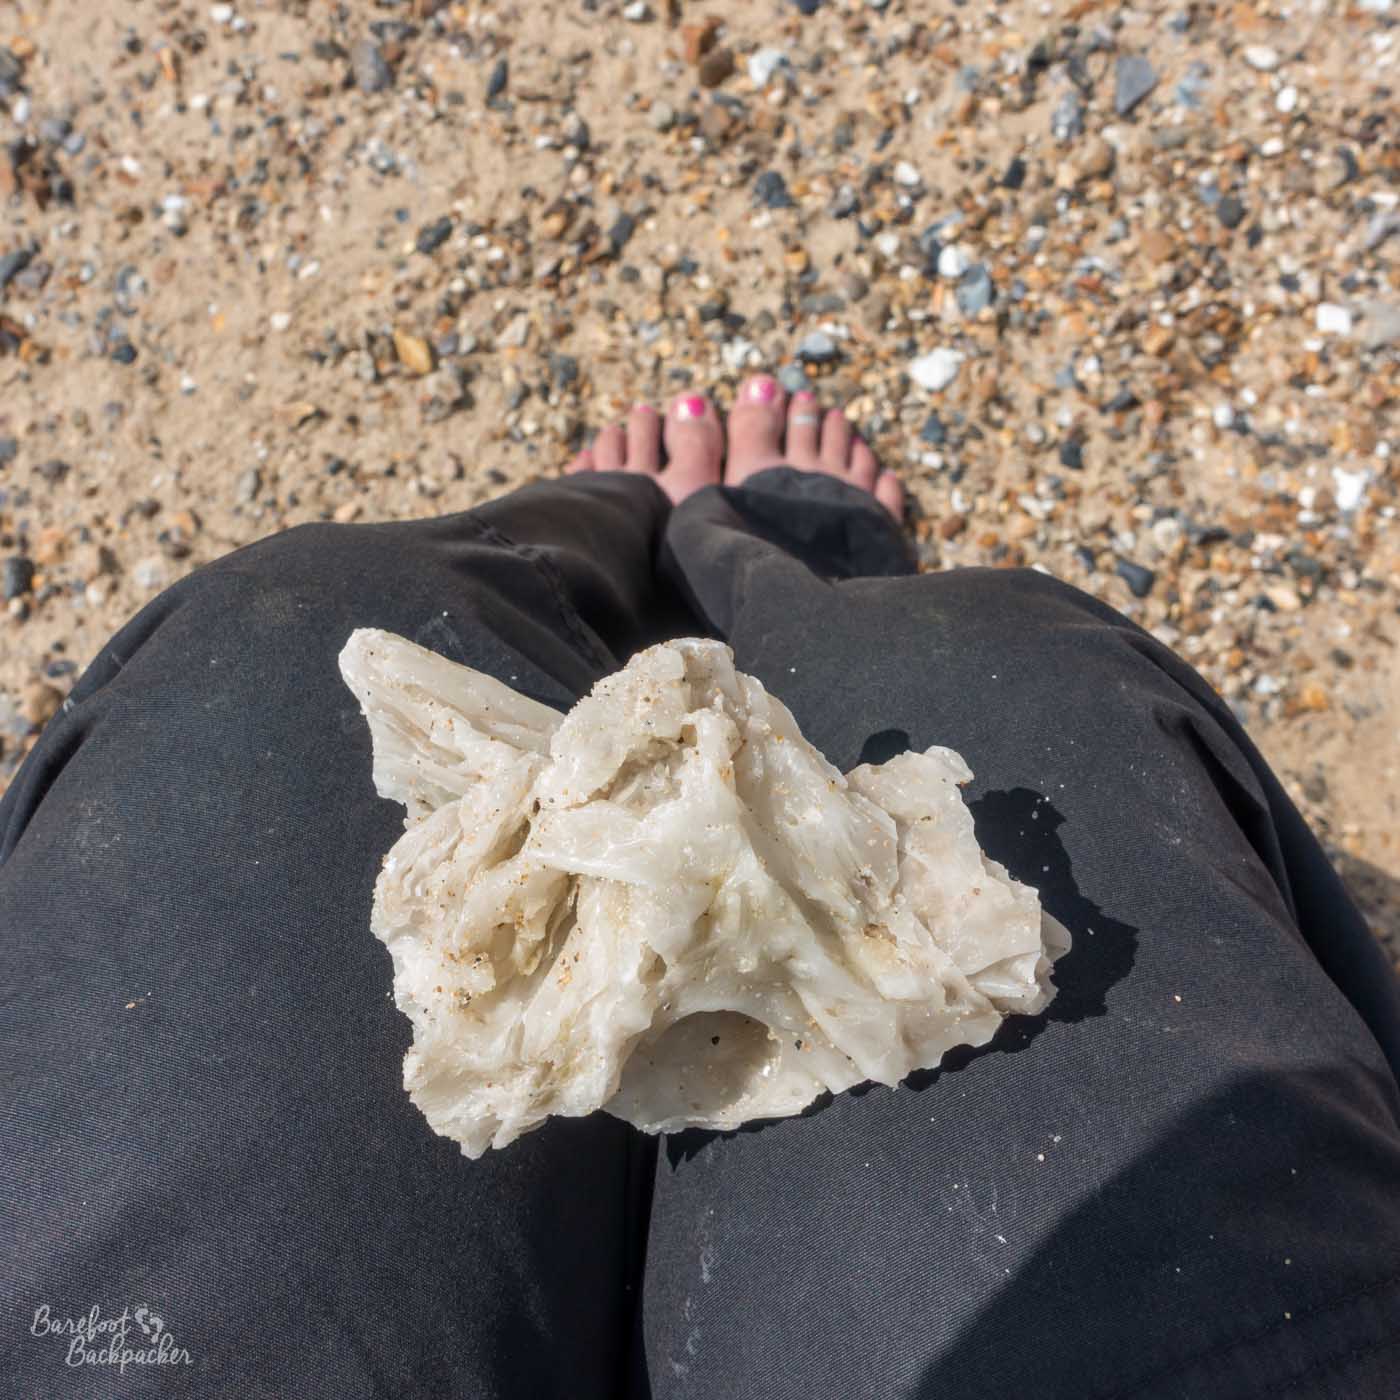 On a shingley beach, I'm sat down. The camera is pointed at my trouser-covered lap, on which is a lump of palm oil - an irregular shape with jagged edges, about the size of my hand.